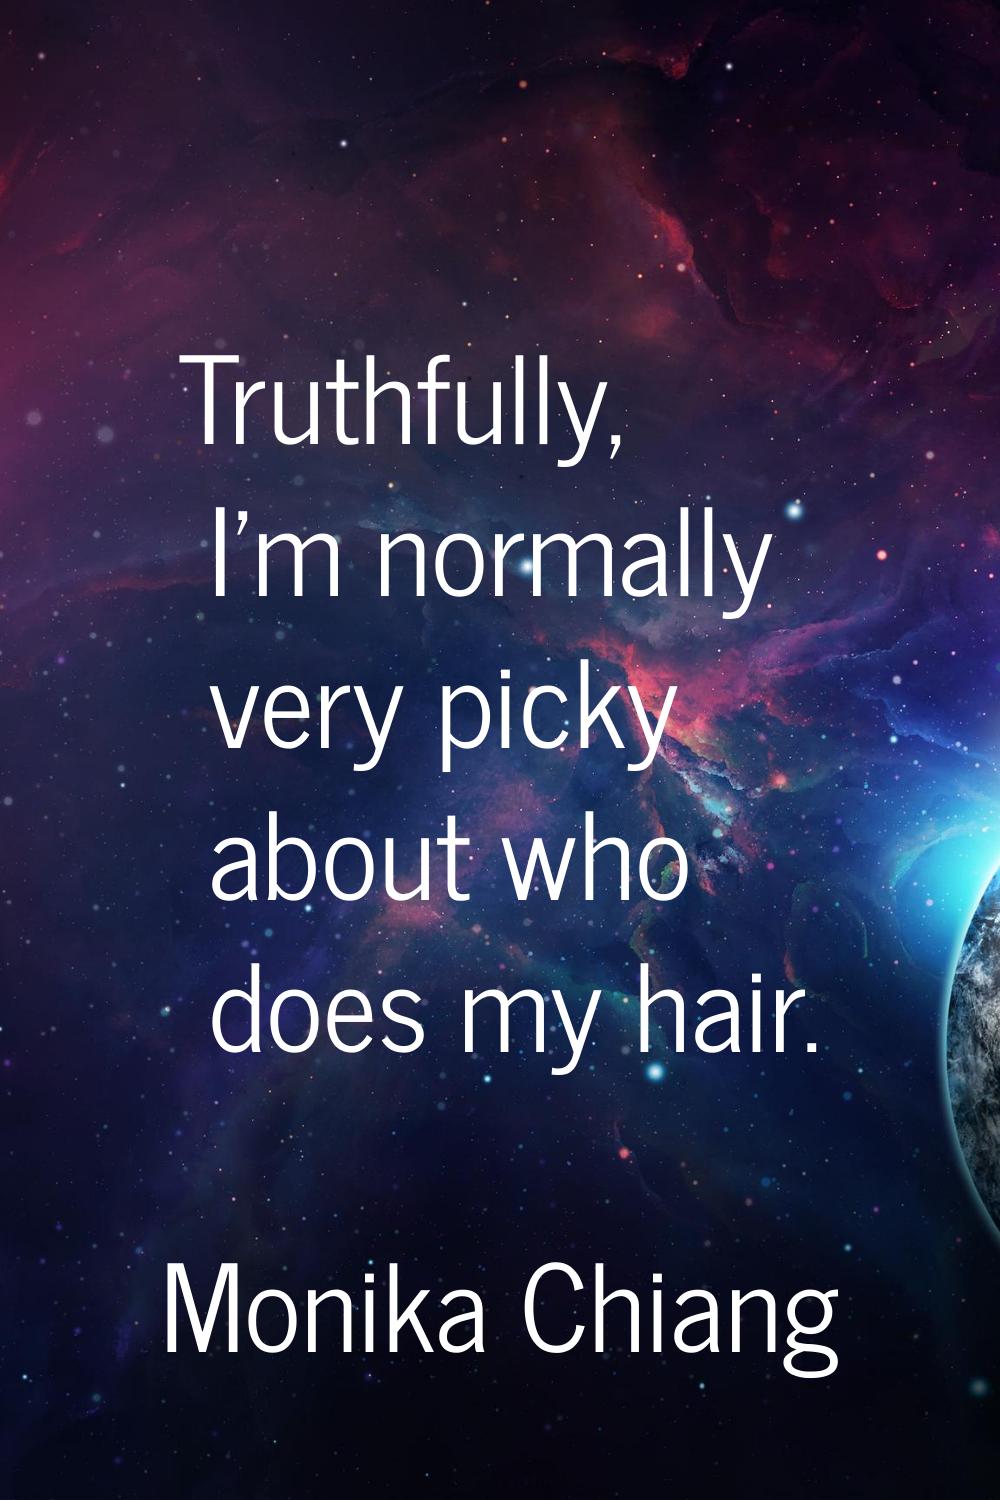 Truthfully, I'm normally very picky about who does my hair.